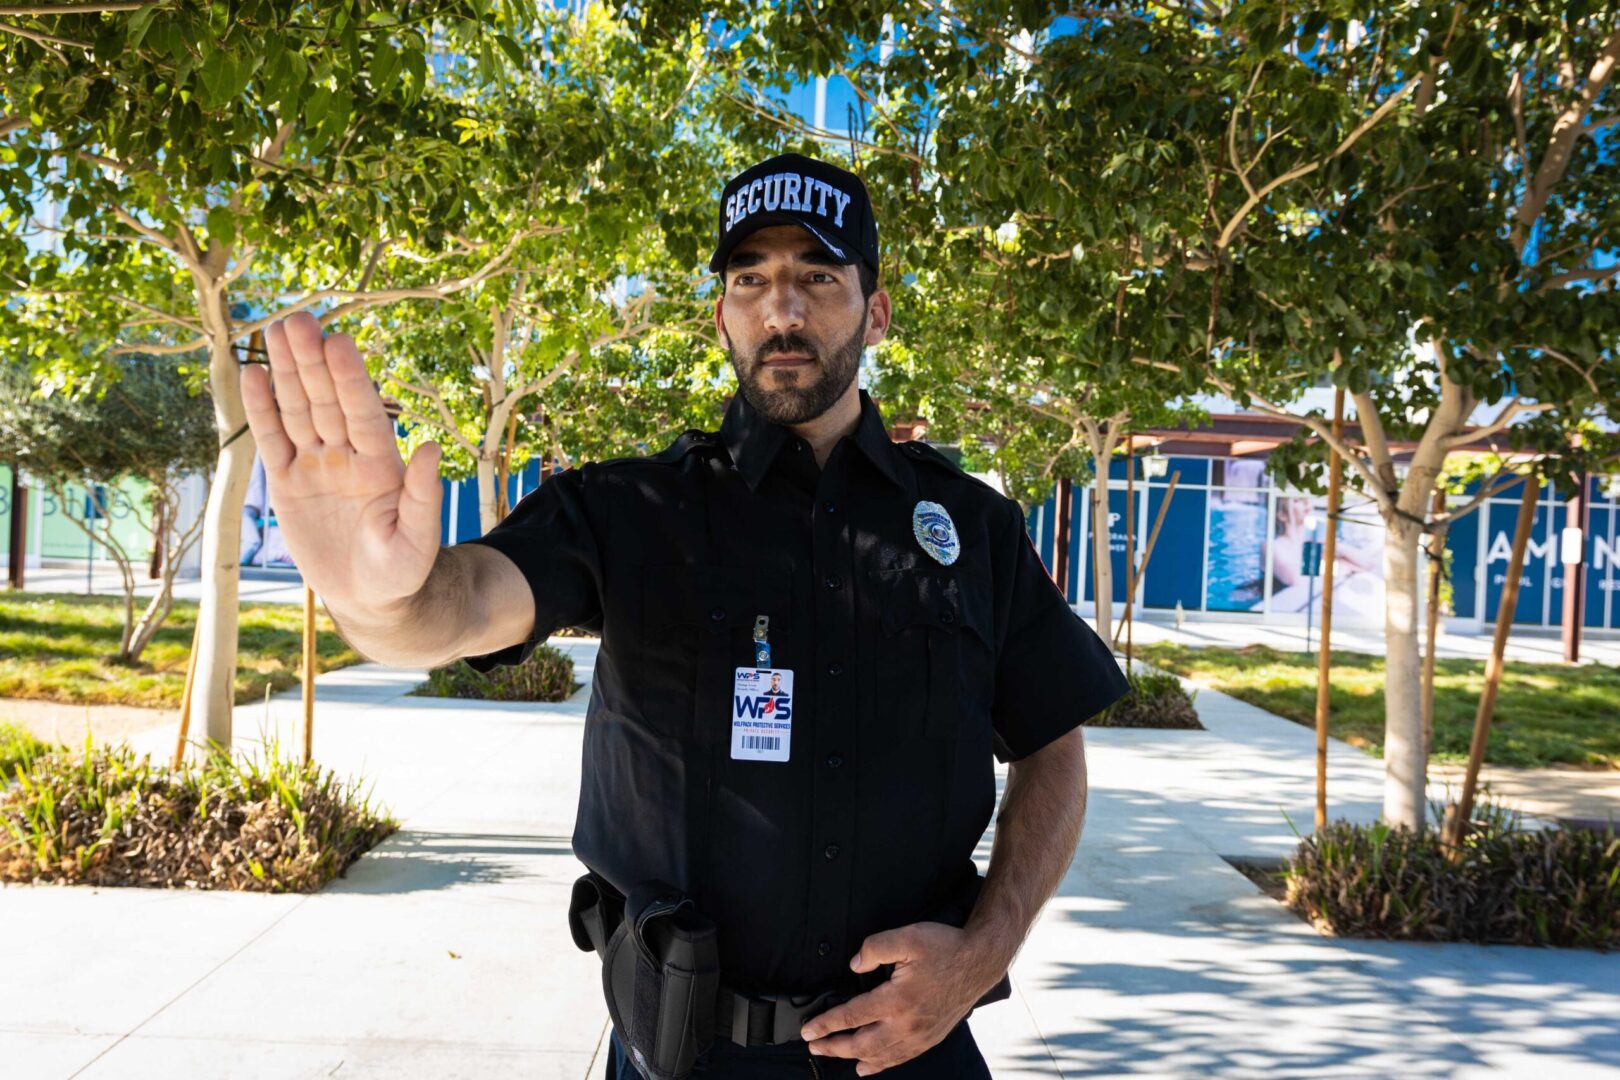 A police officer is waving to the camera.